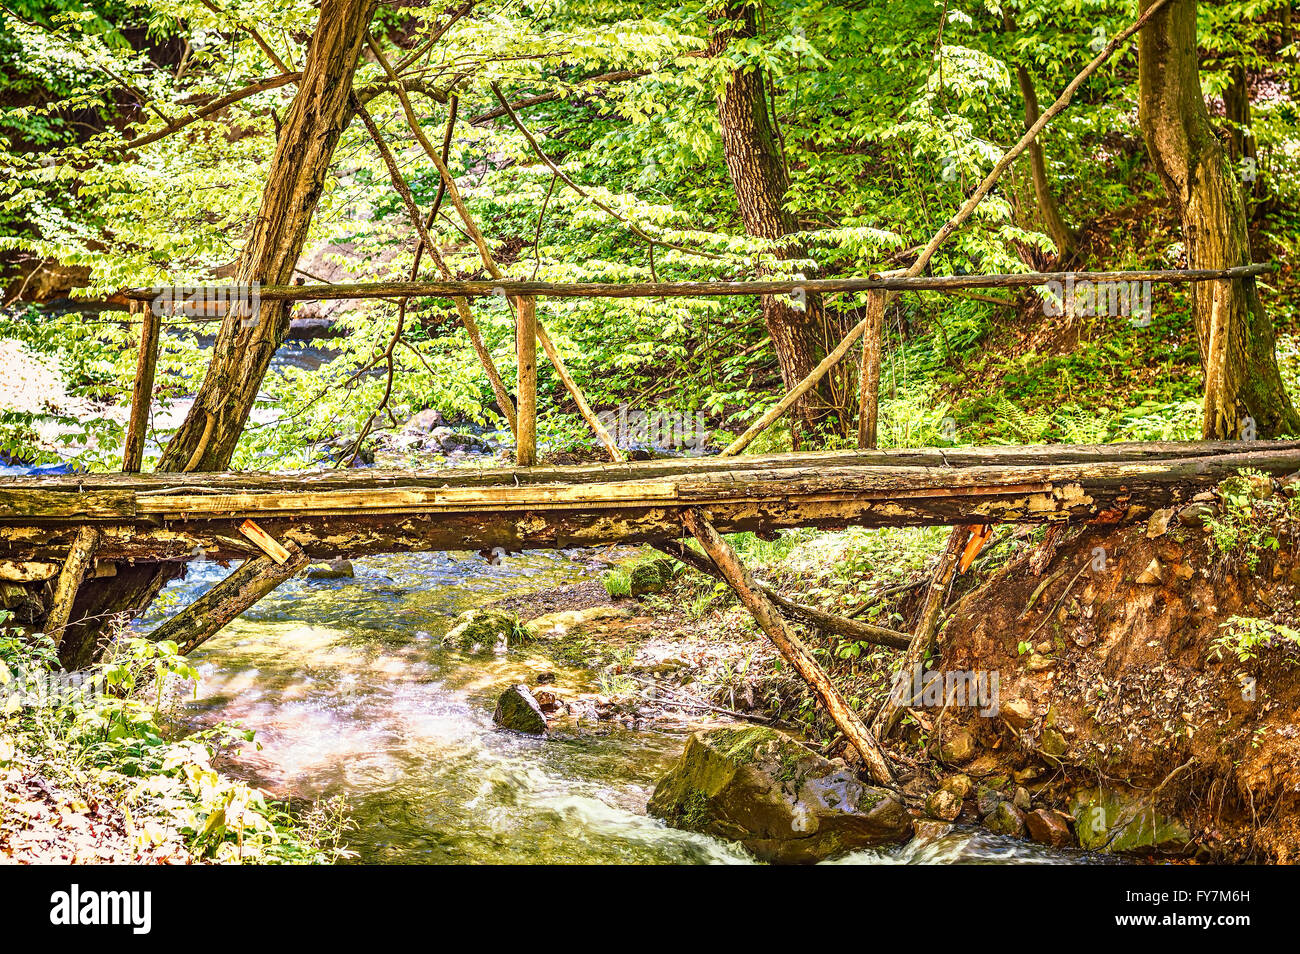 Lateral view of a bridge made of wood in the forest, over a creek. Stock Photo